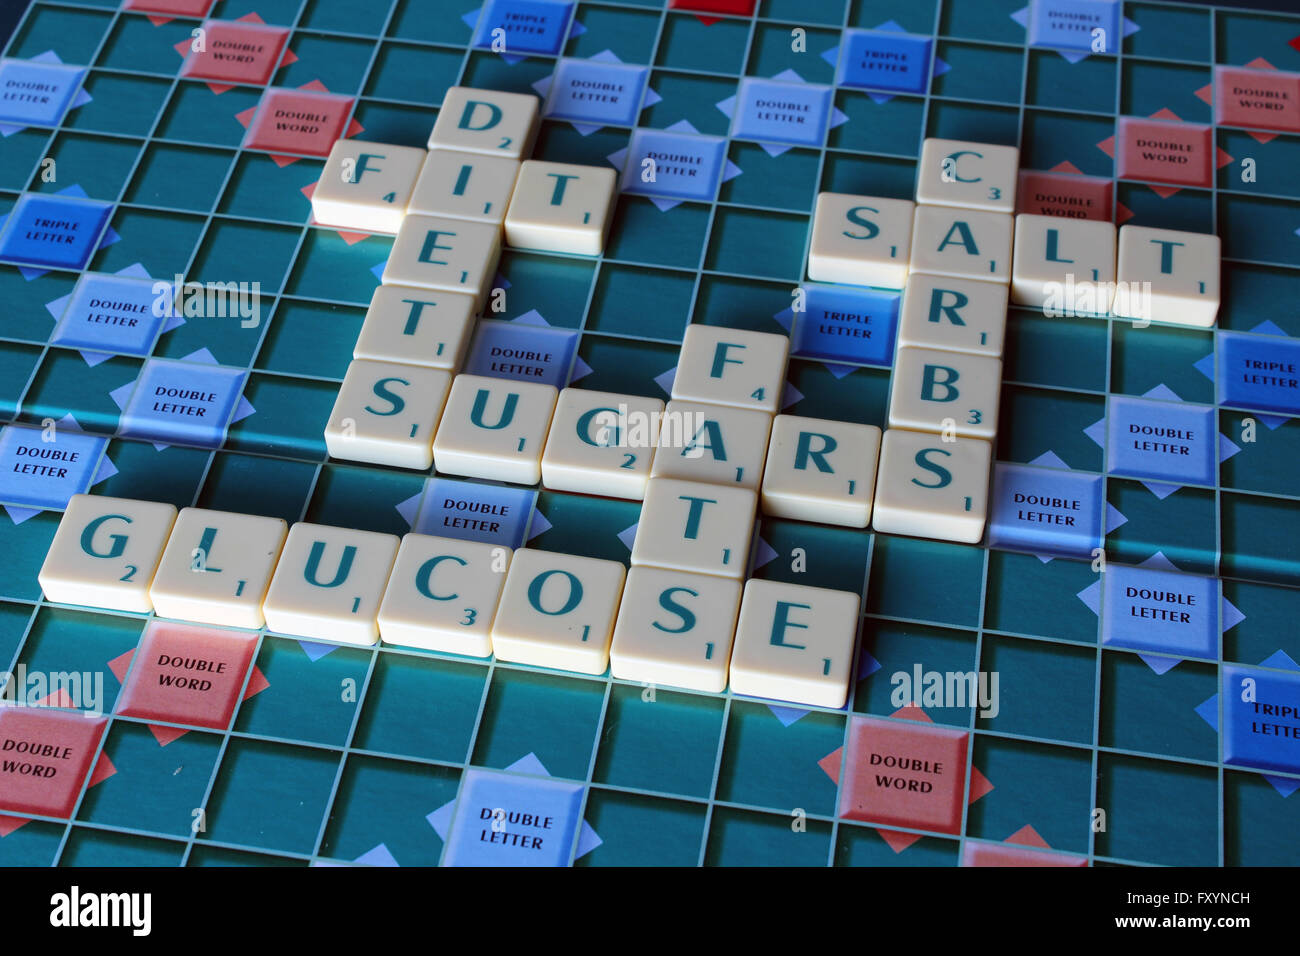 A Scrabble board with words about sugar and fattening foods Stock Photo